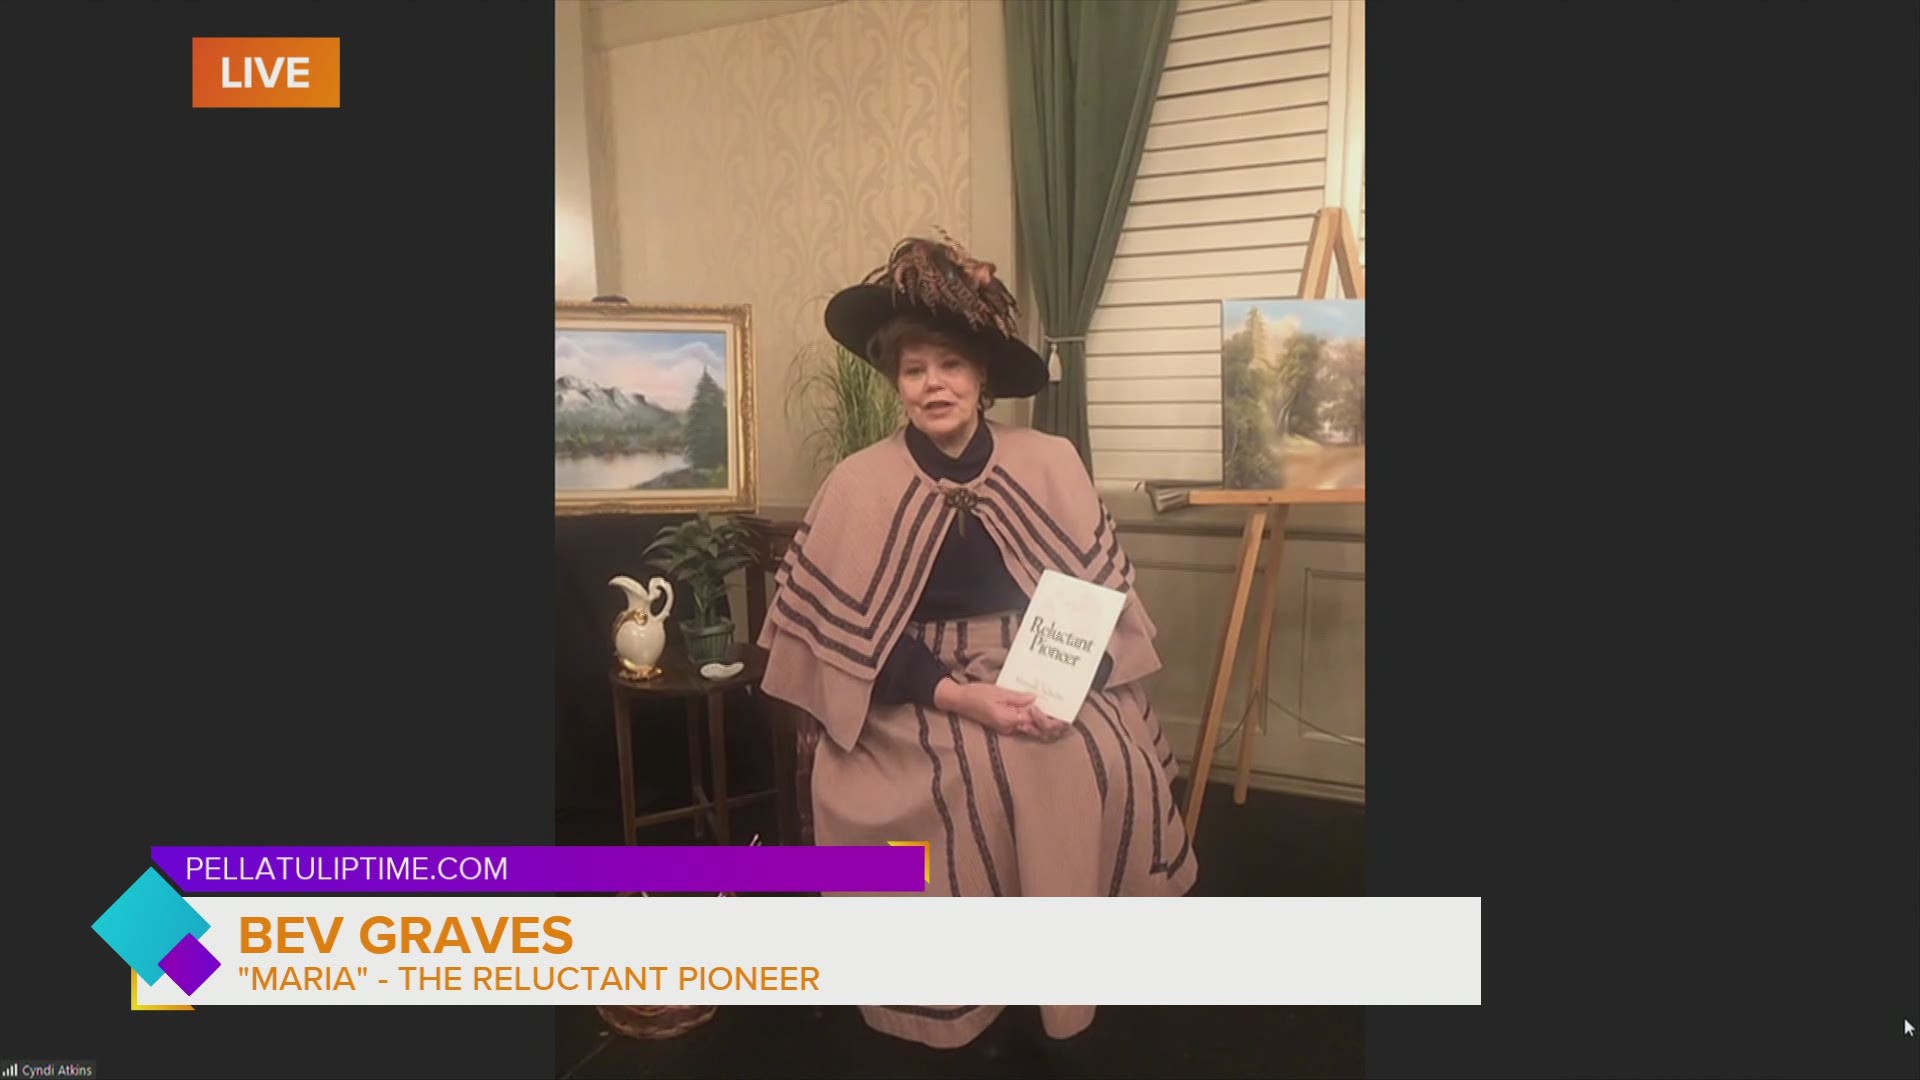 Bev Graves celebrates Dutch history and traditions, live from the Pella Opera House, getting ready for the Tulip Time Festival in Pella May 6-8, 2021 | PAID CONTENT